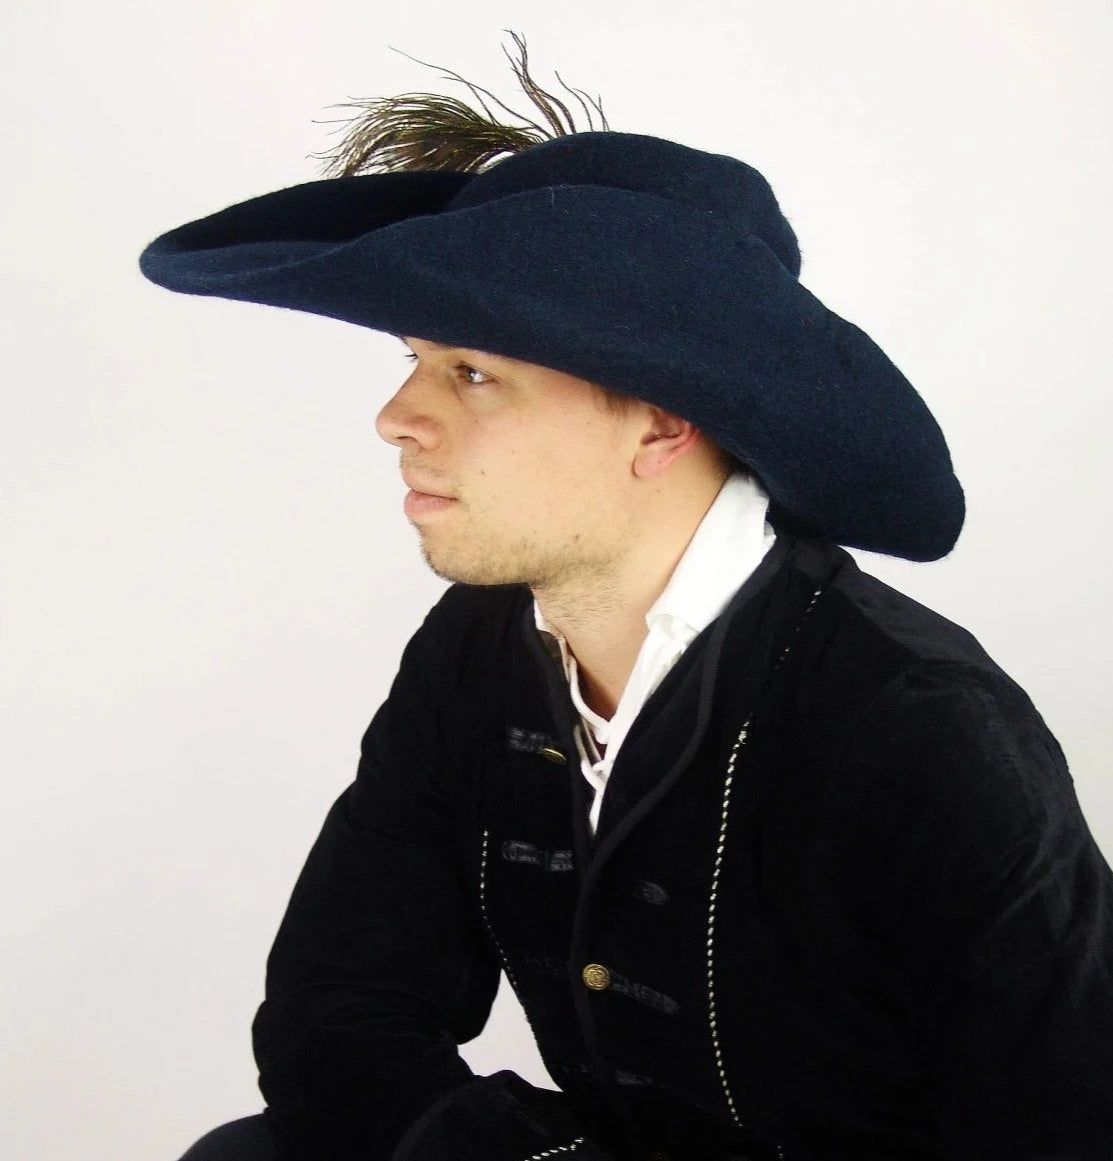 Sophisticated Wool Renaissance Hat with Plume – Refinement Meets Historical Design